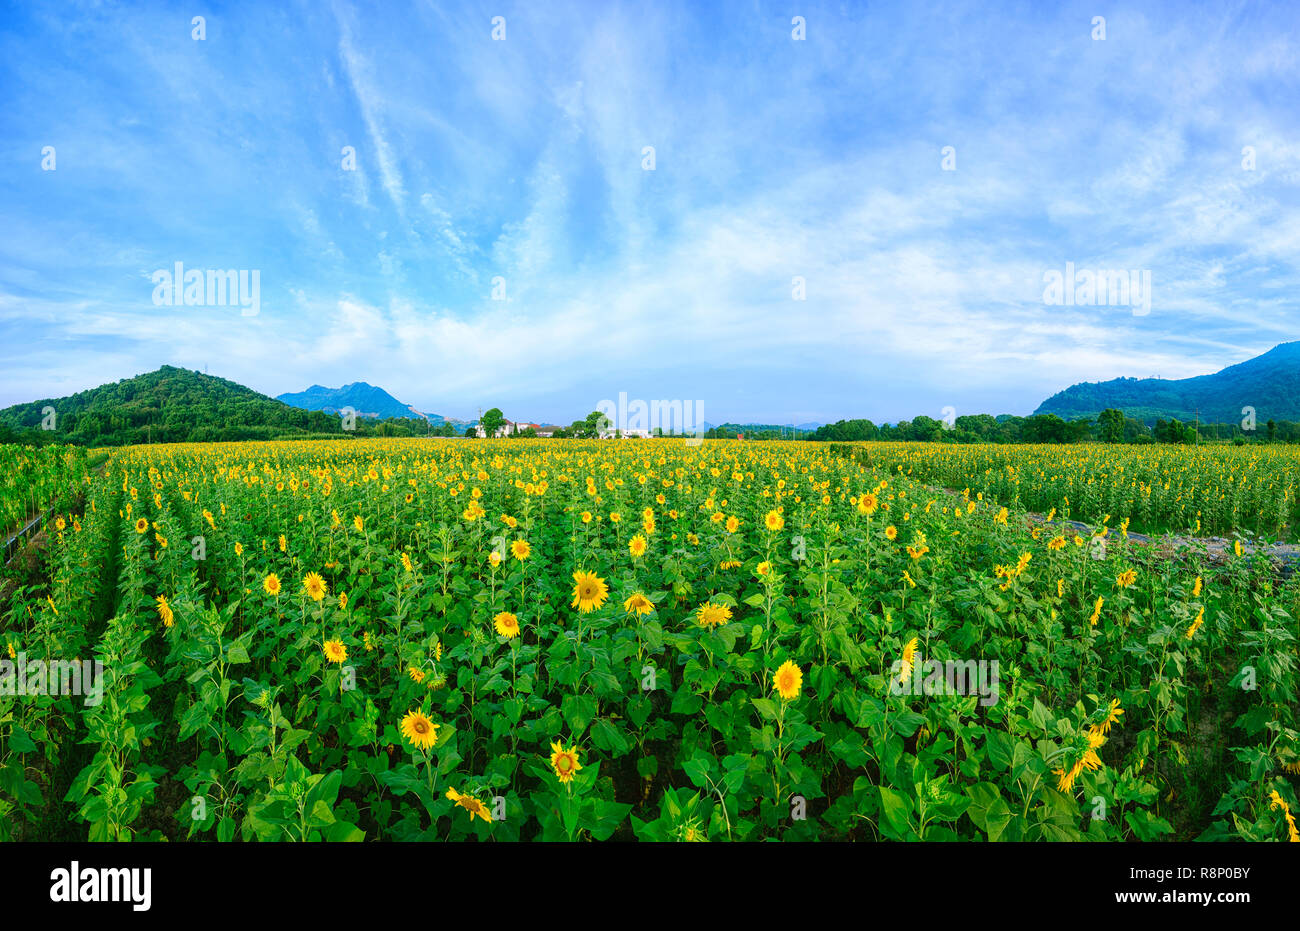 Field of sunflowers and blue sky Stock Photo